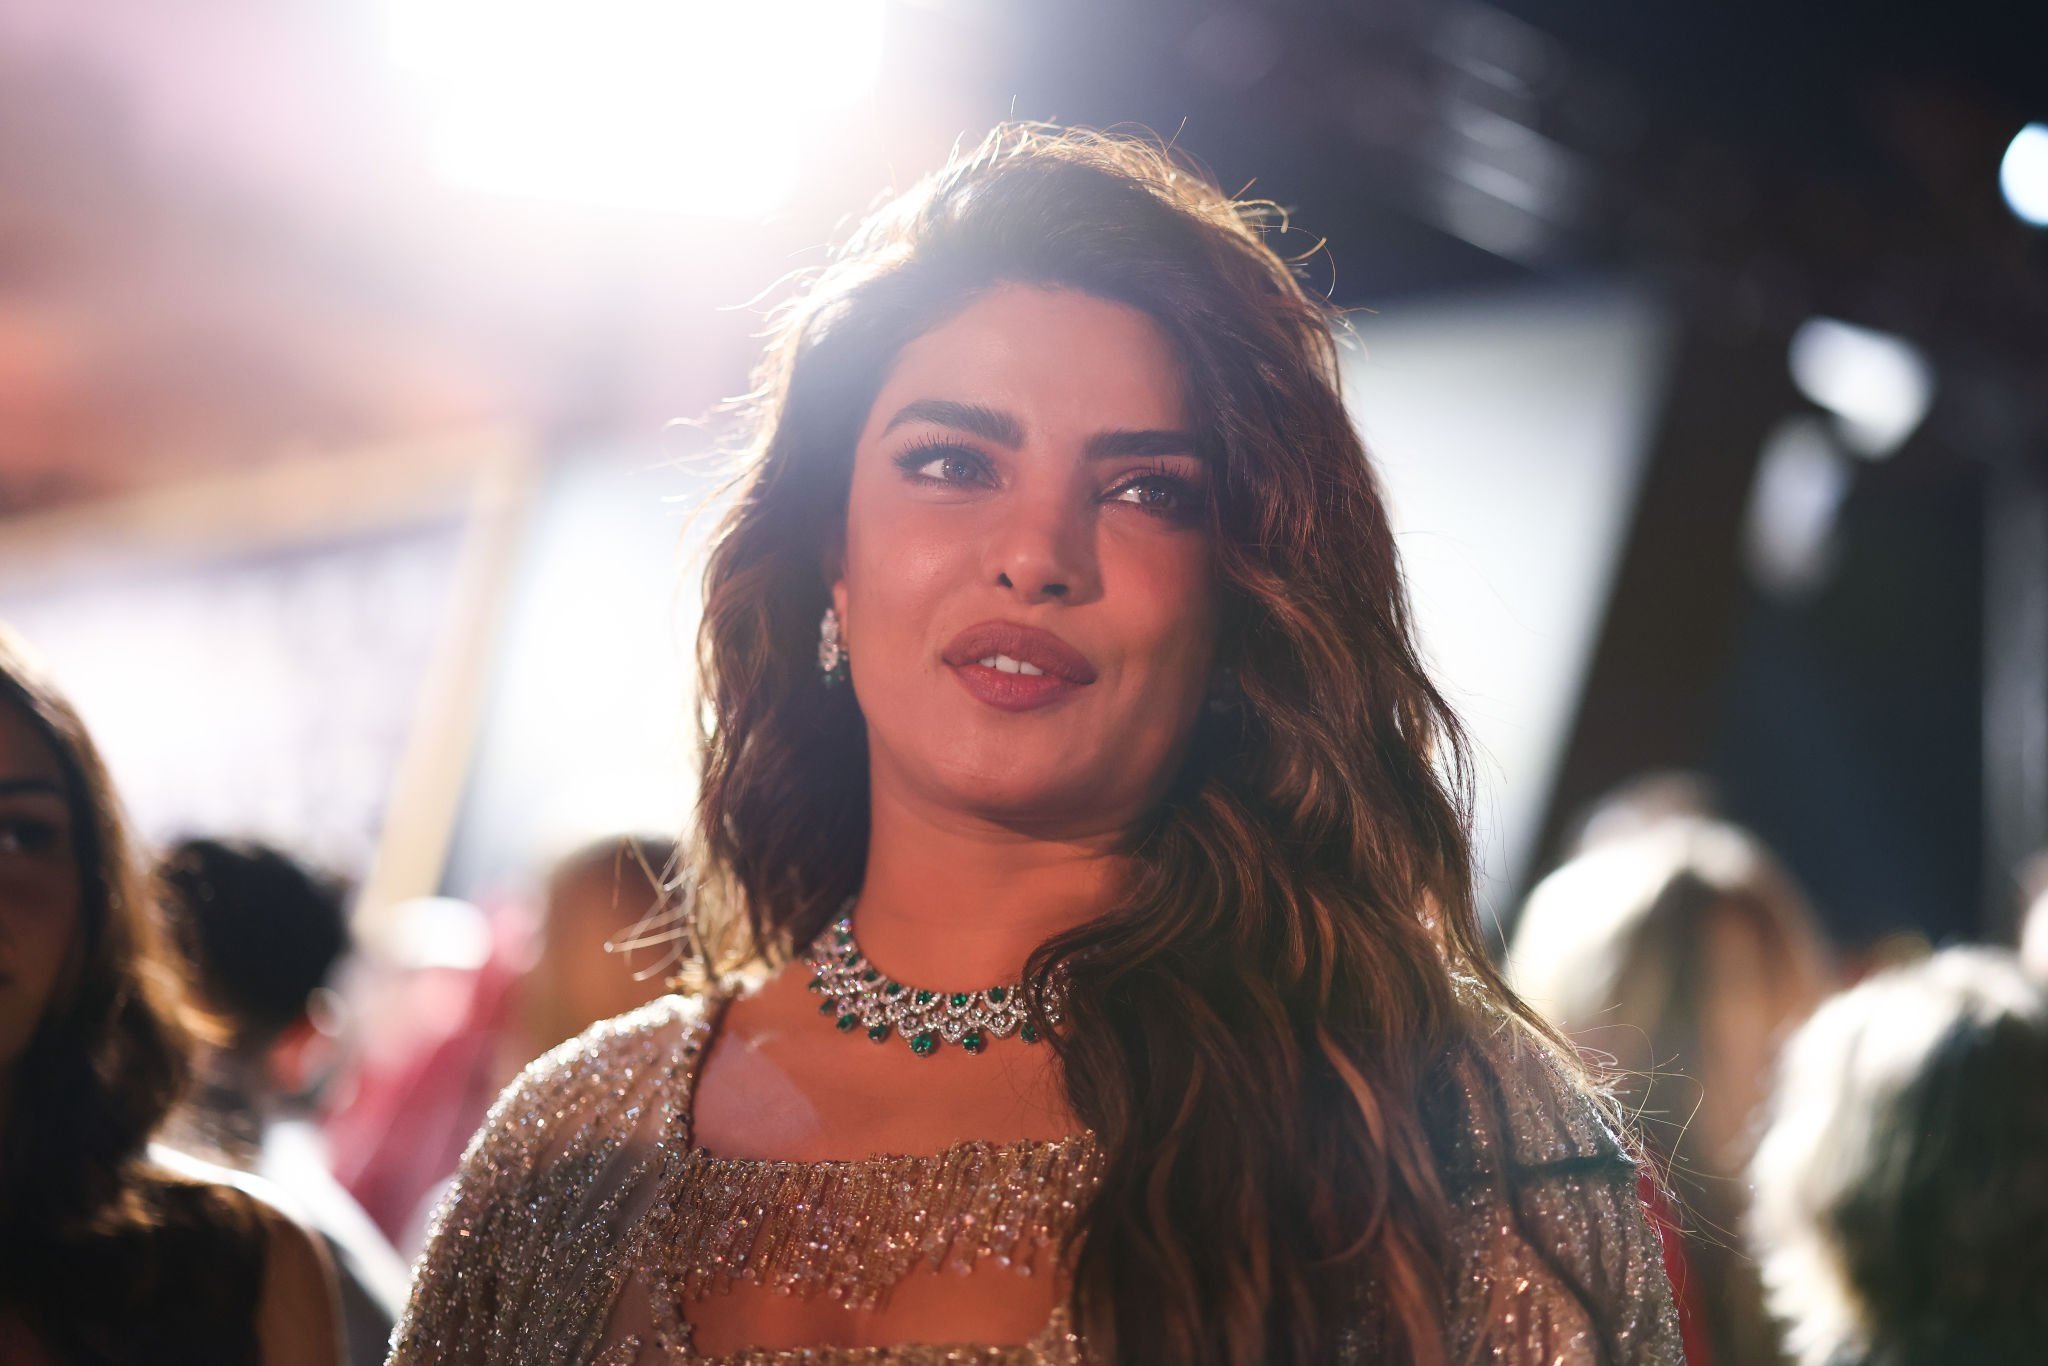 Priyanka Chopra makes a cancer patient's night special at the JoBros concert